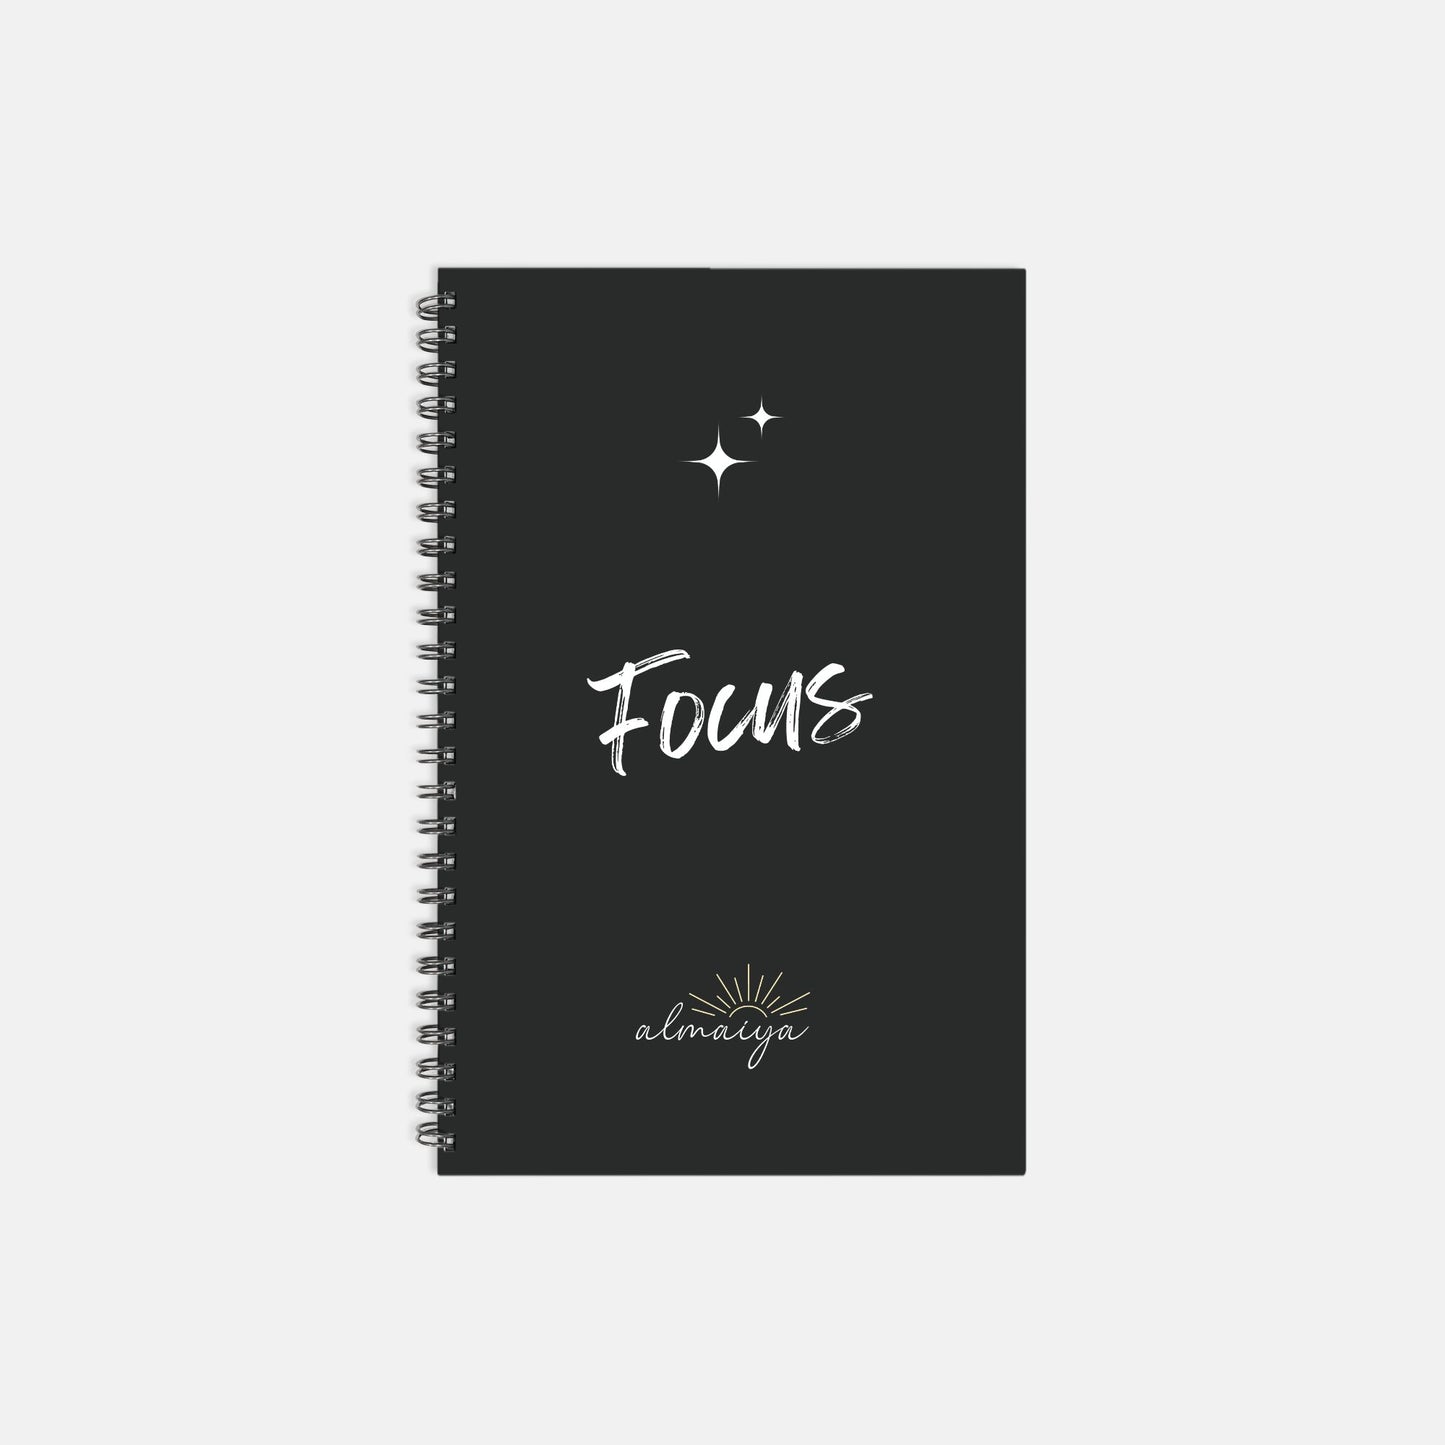 FOCUS Softcover Notebook